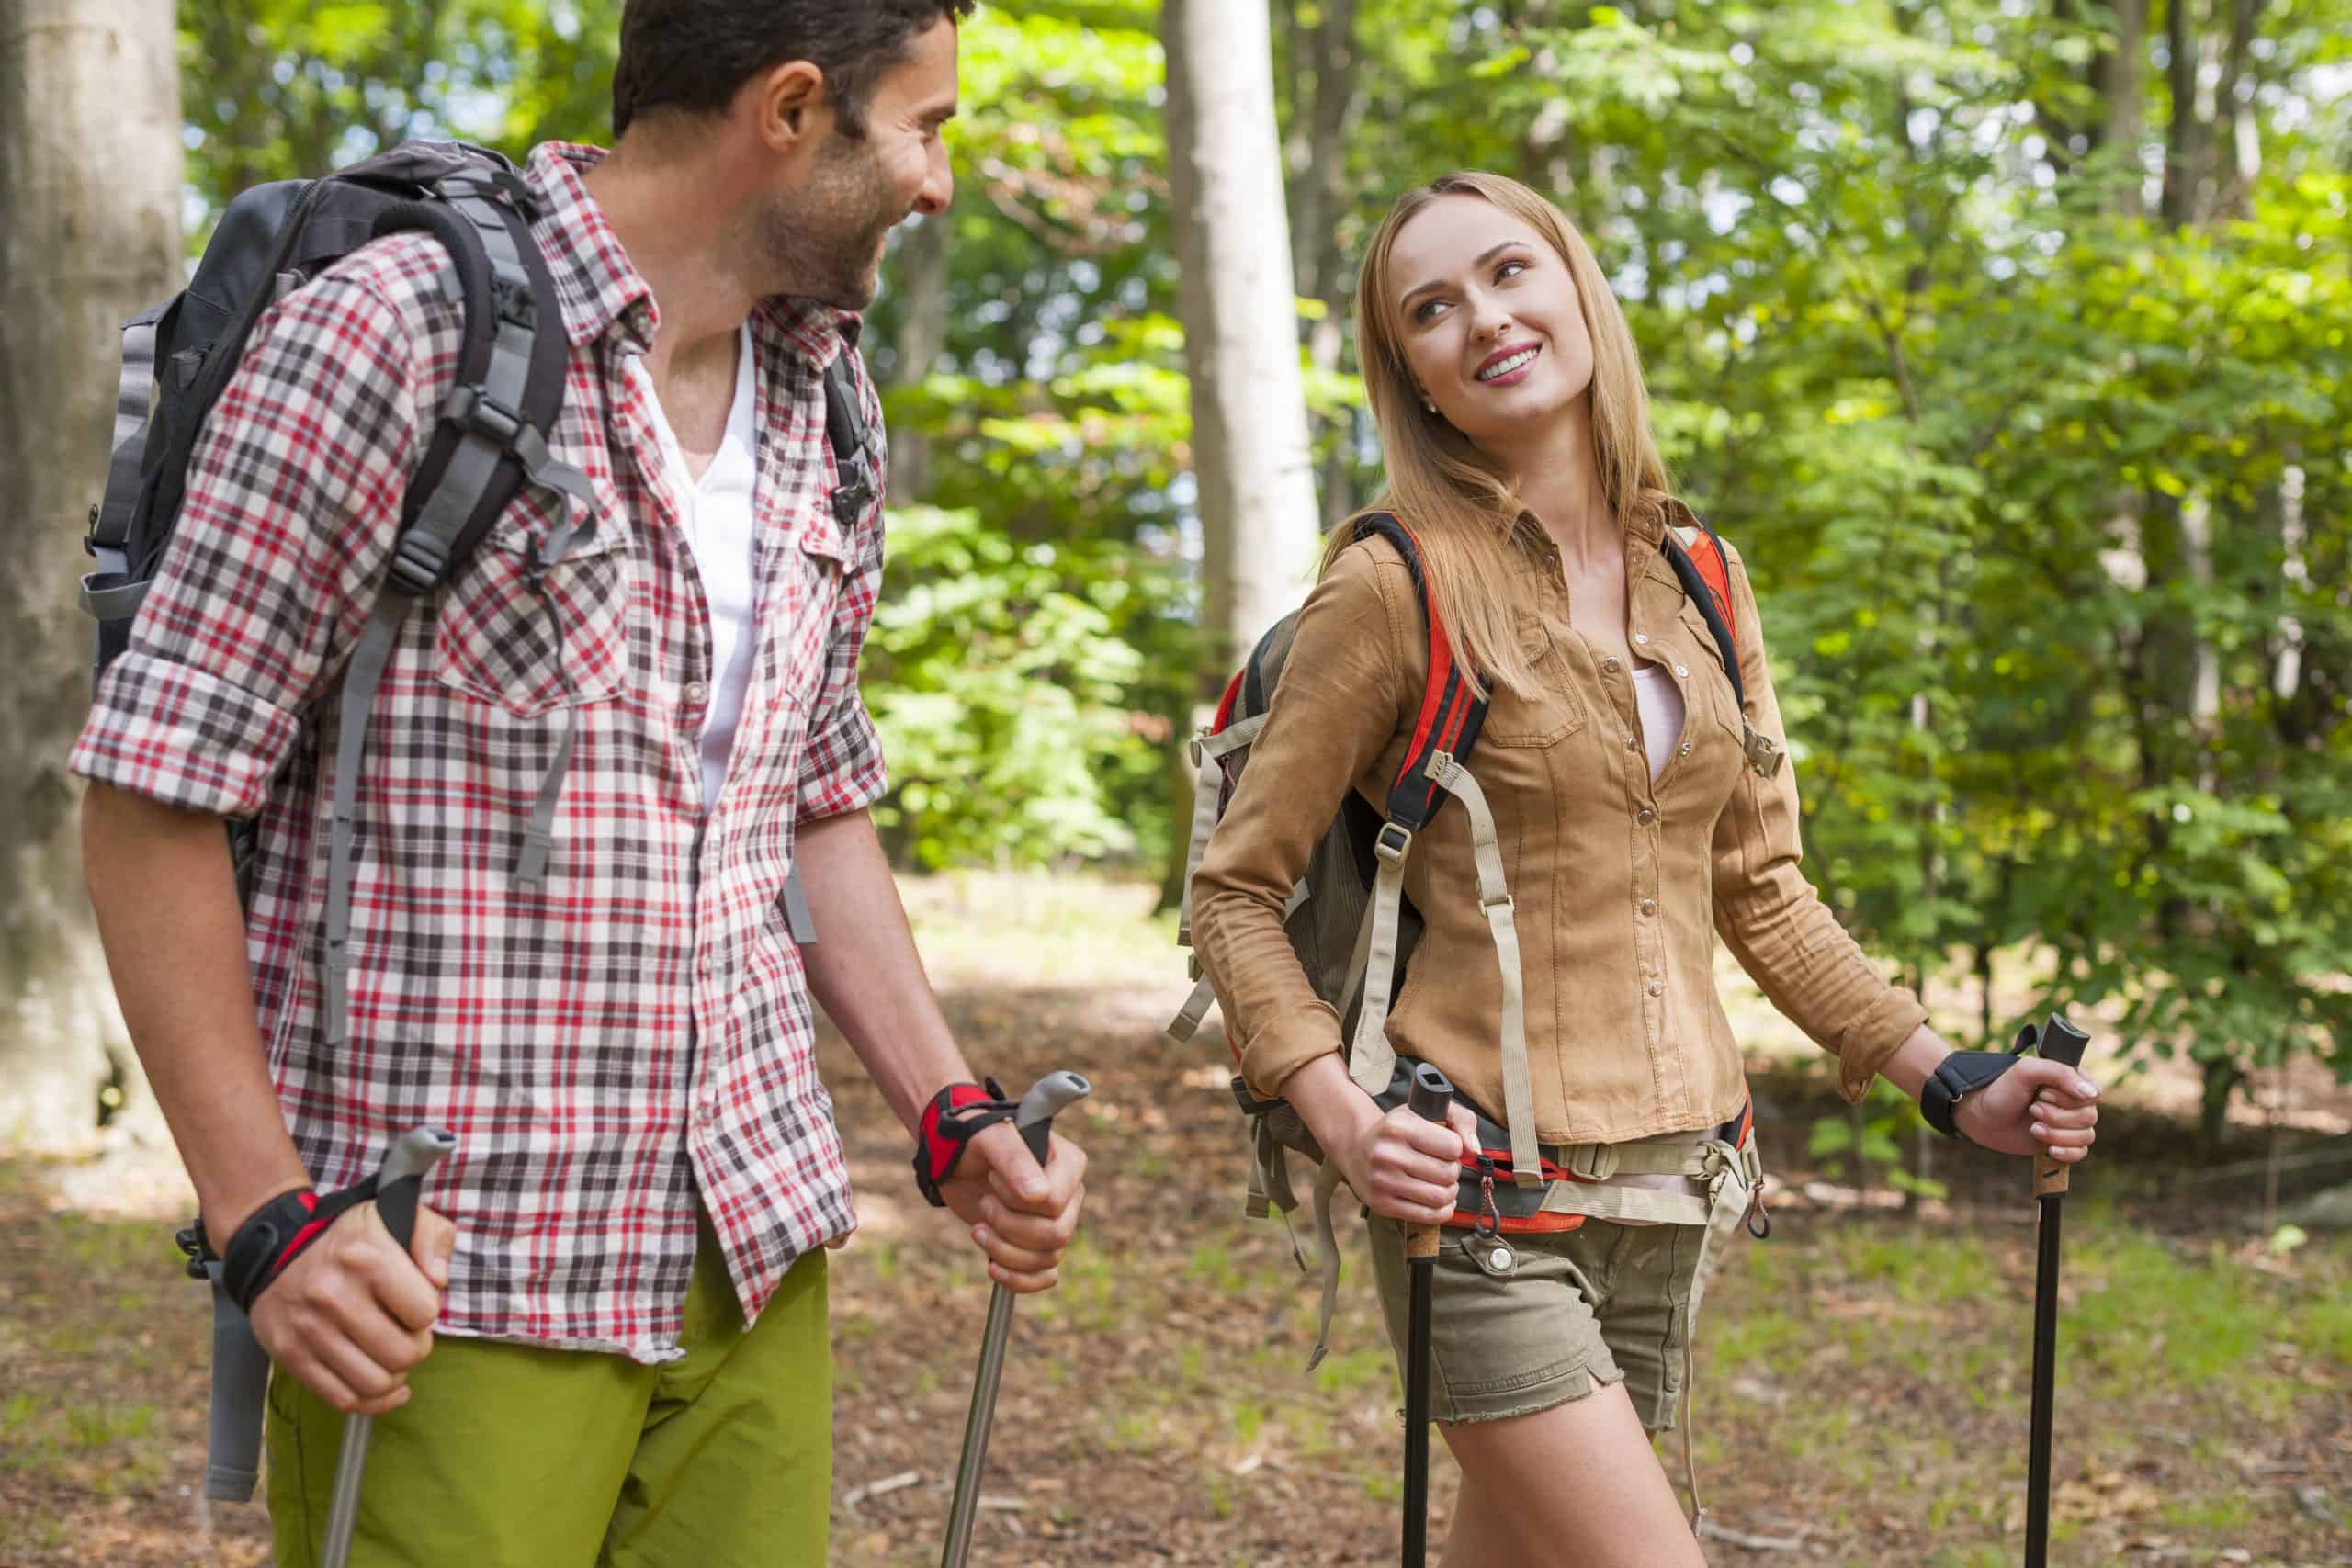 Does Nordic walking help with weight loss?